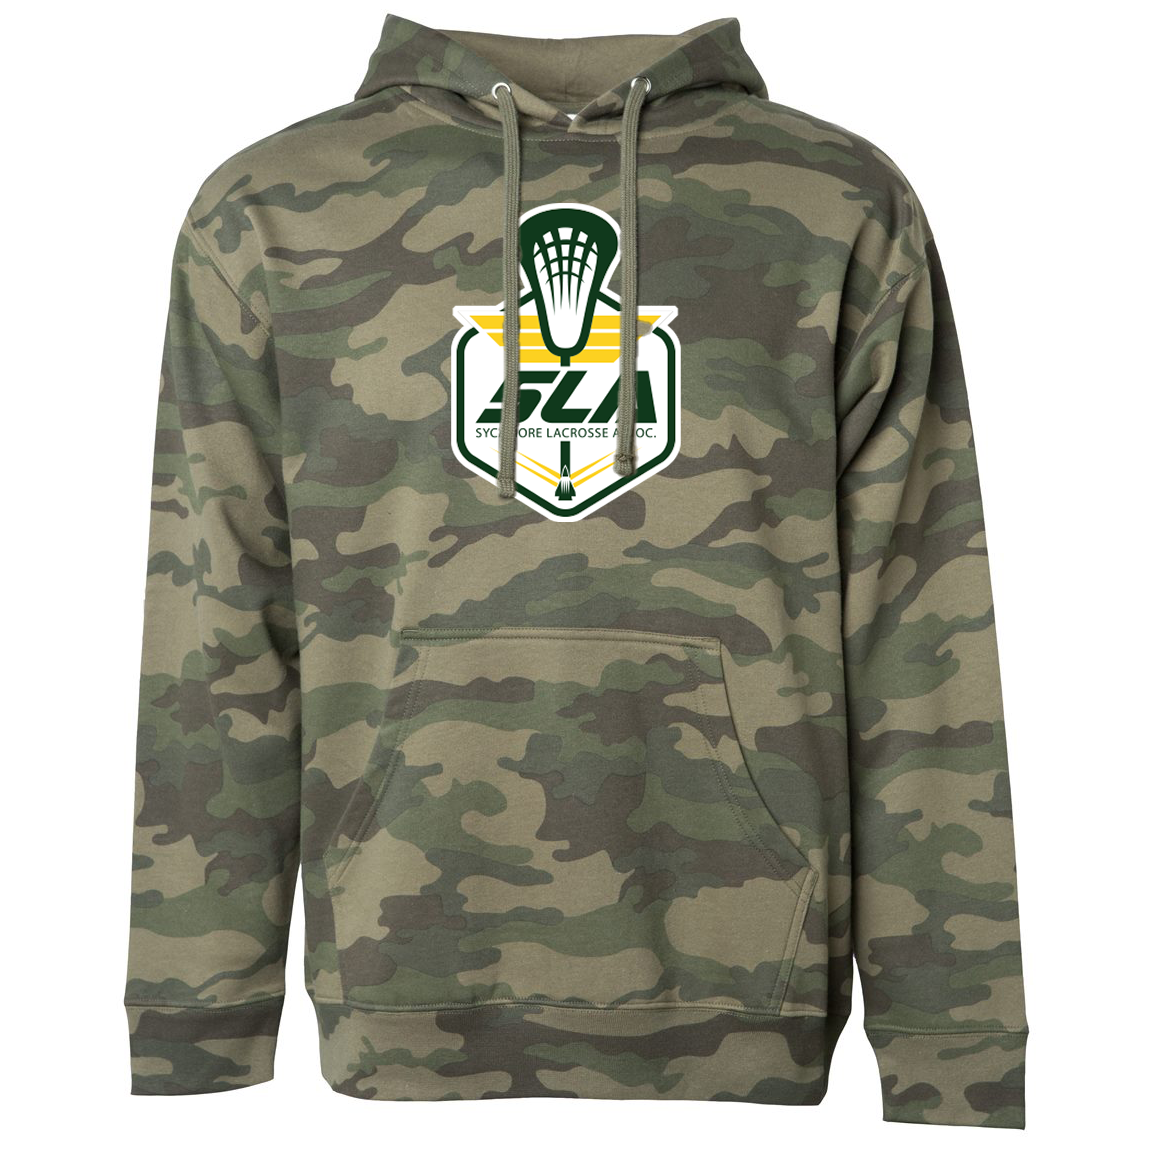 Sycamore Lacrosse Association Midweight Hooded Sweatshirt